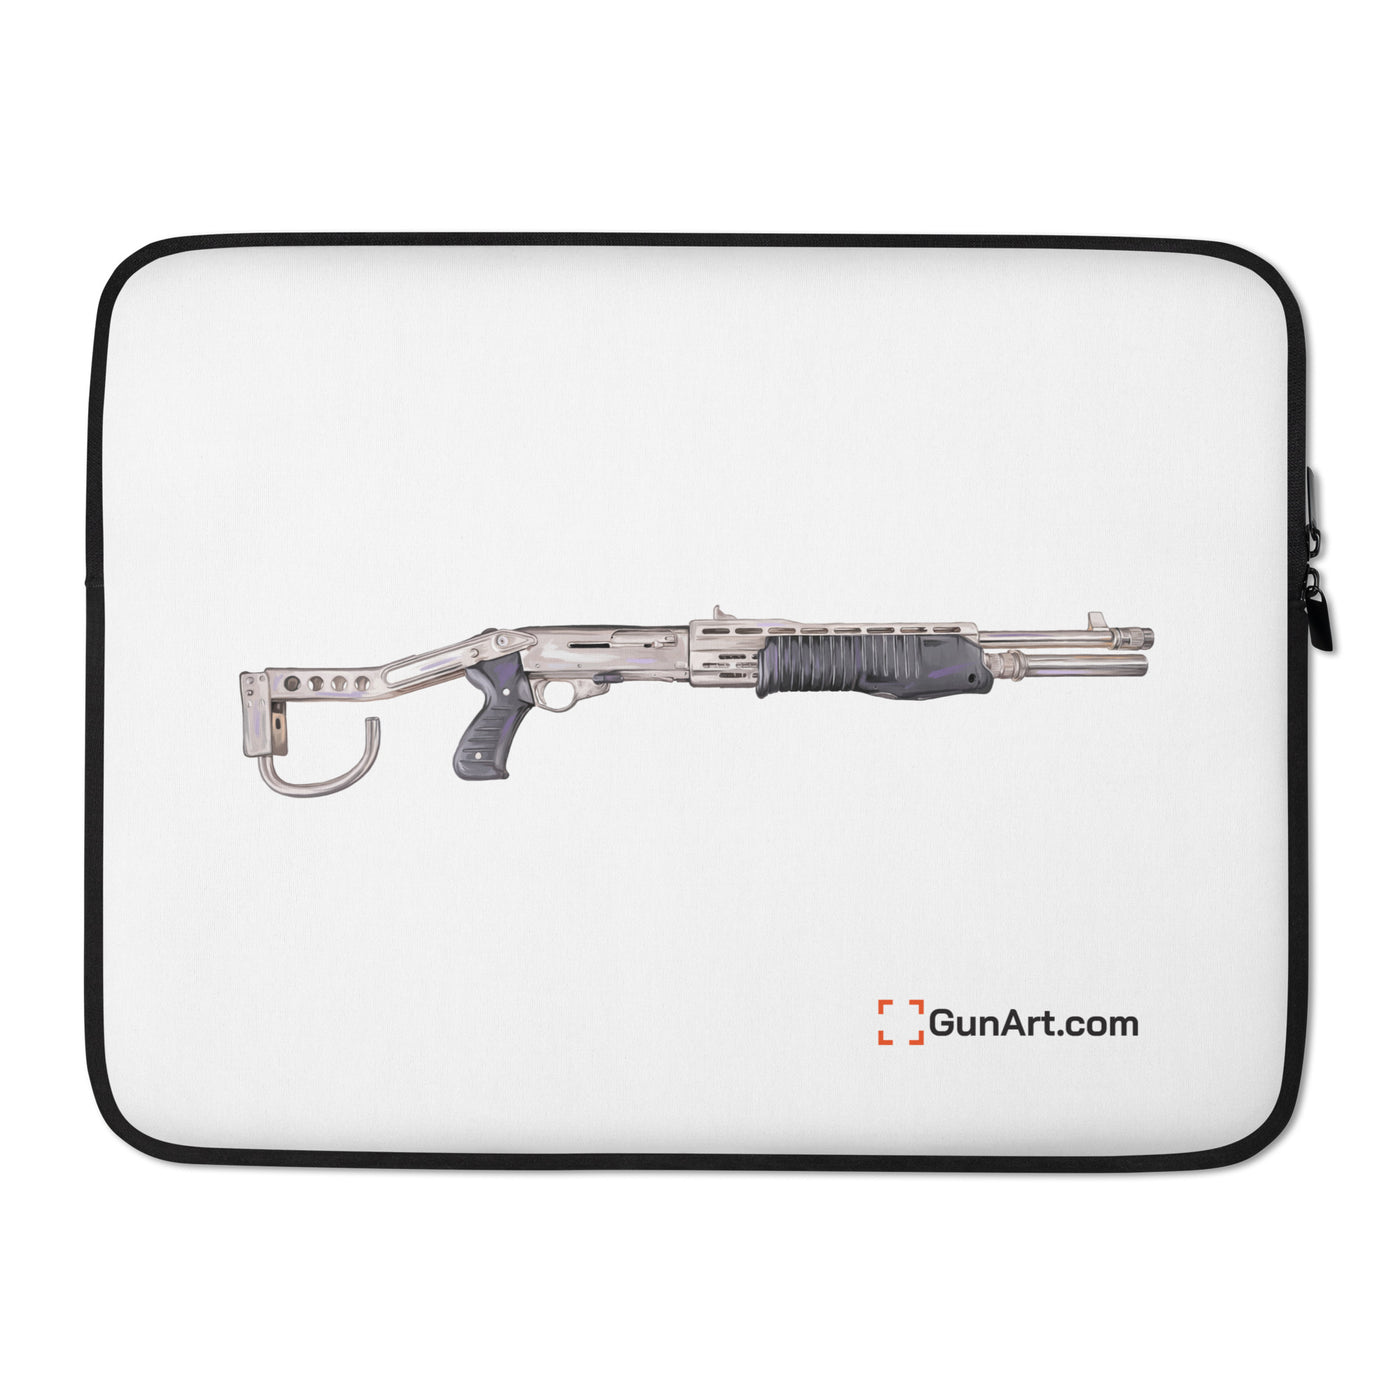 Selectable Mode Combat Shotgun Laptop Sleeve - Just The Piece - White Background